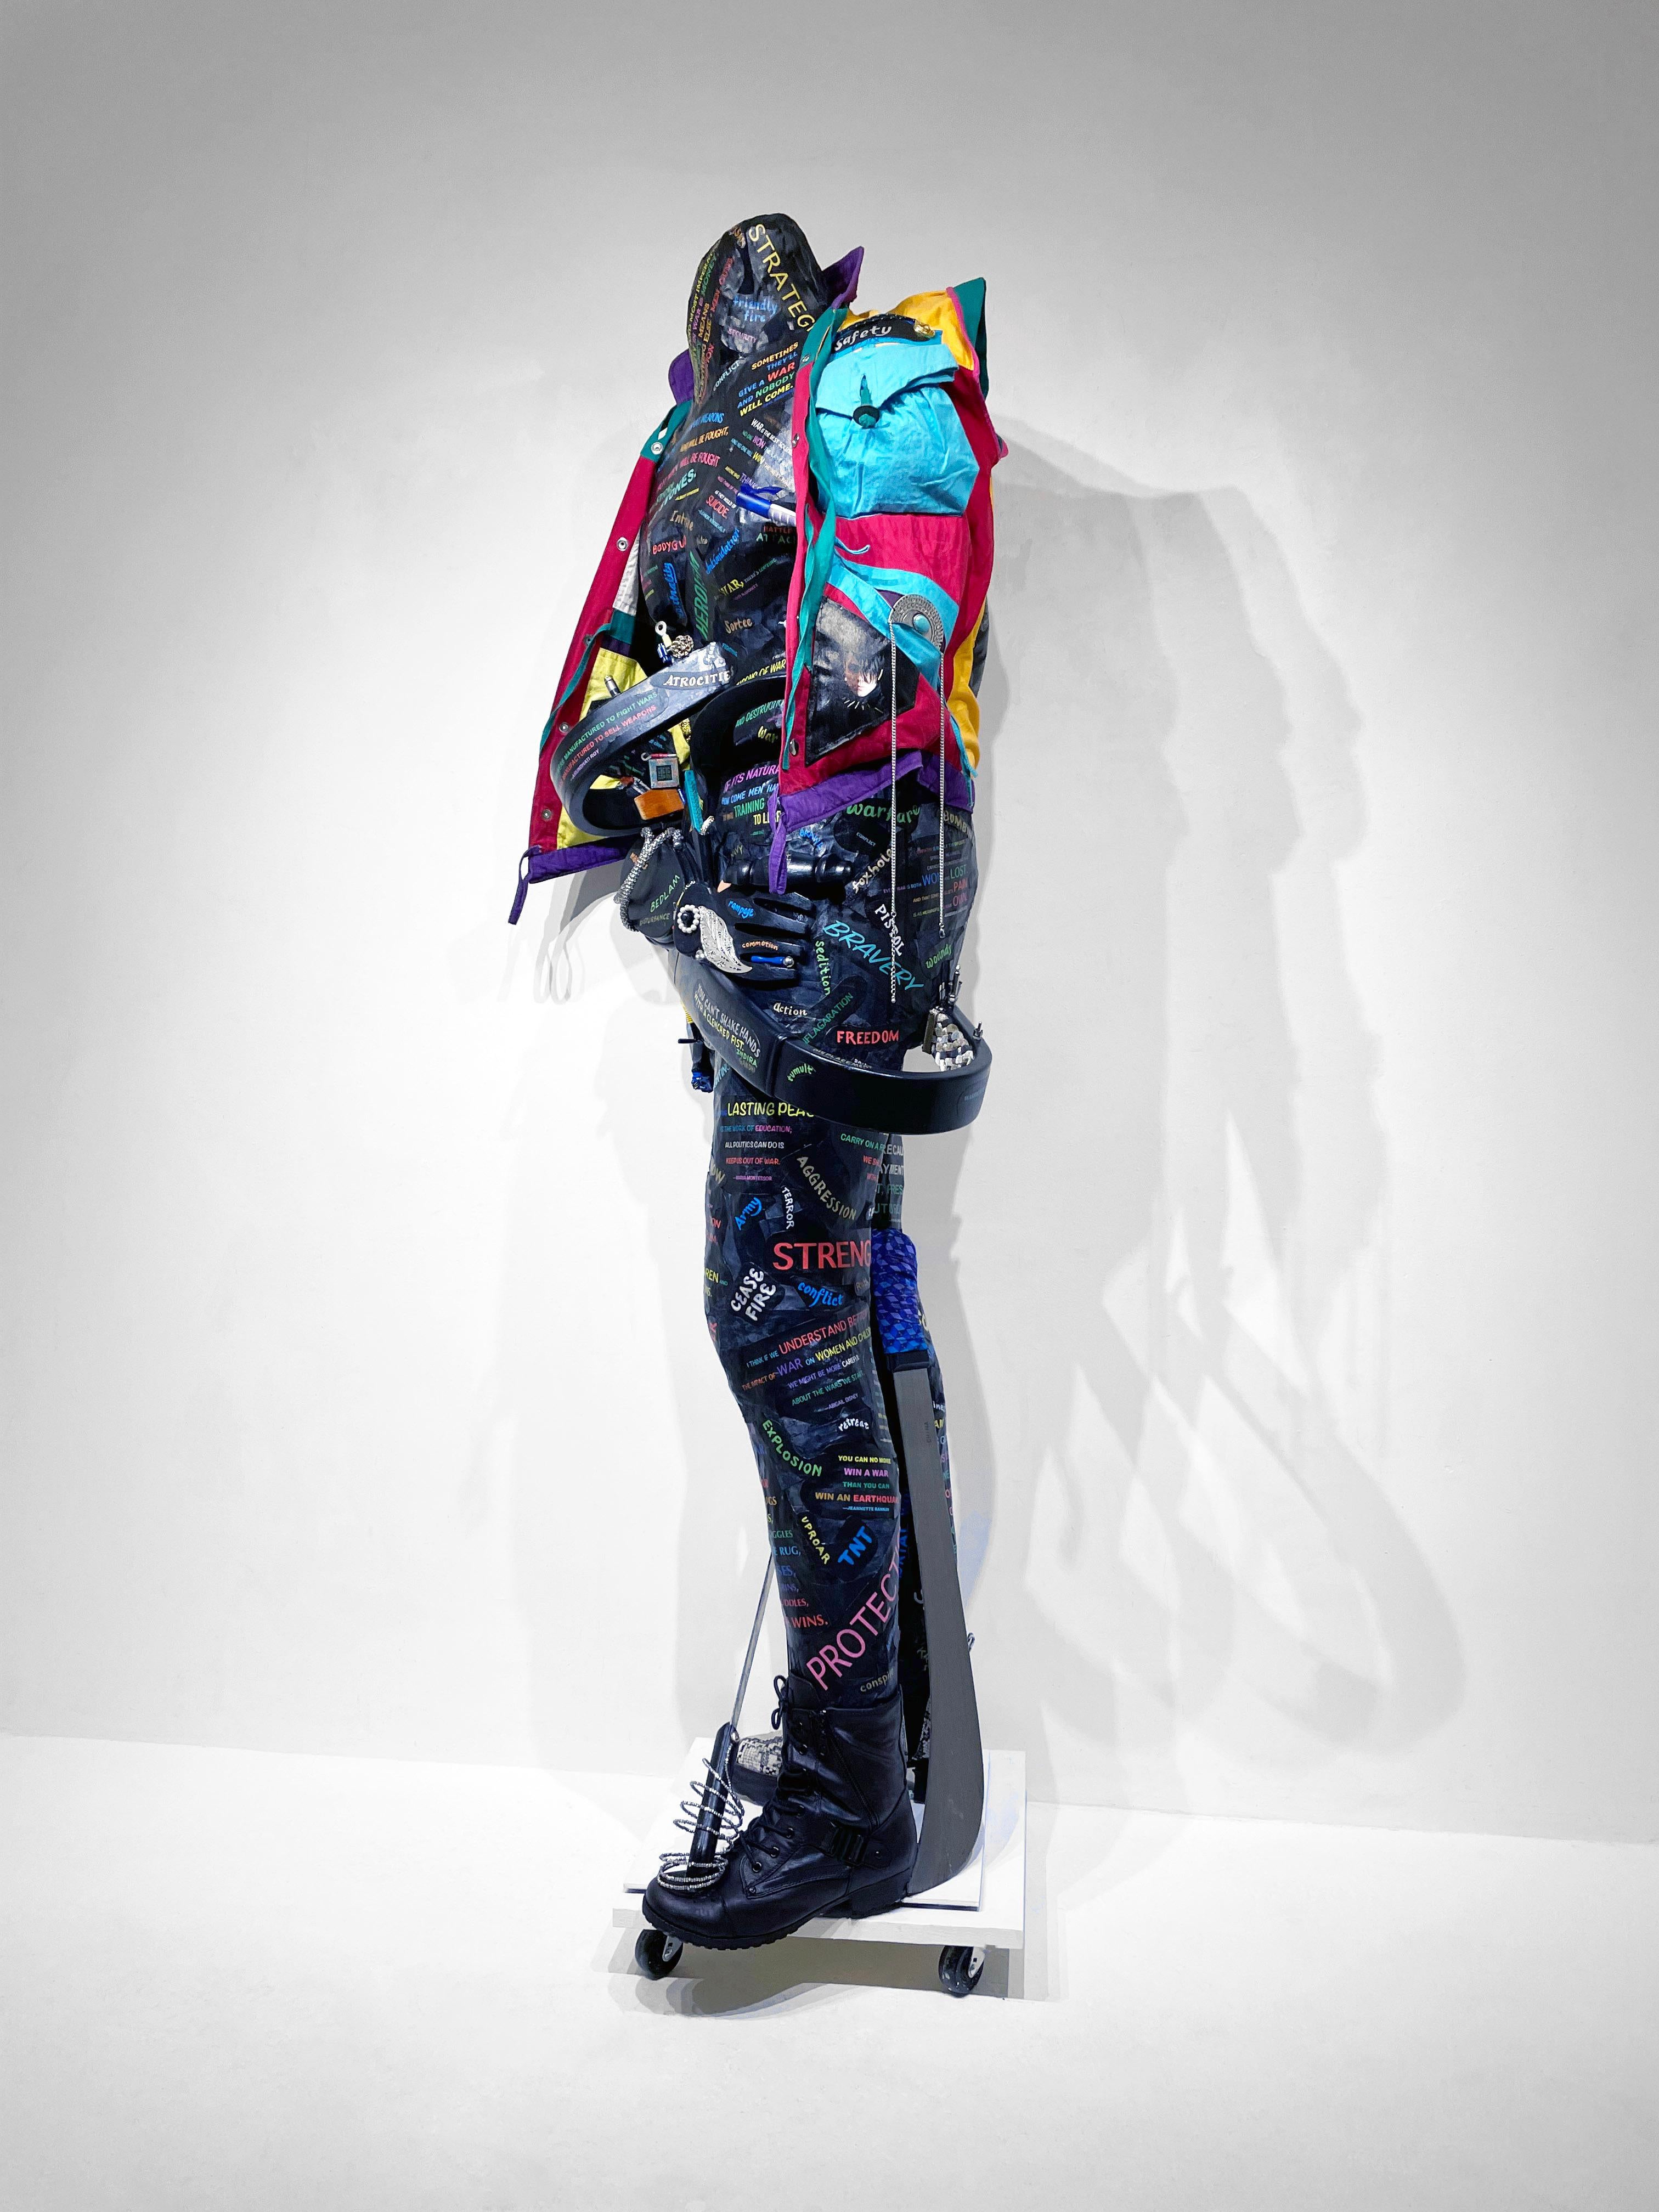 Linda Stein, Warrior Waging Peace: Addressing War 1277 - Feminist Figurative Mixed Media Black and Colorful Contemporary Sculpture 

Free-standing contemporary sculpture with vest including images of comics Wonder Woman. Written over body are quotes